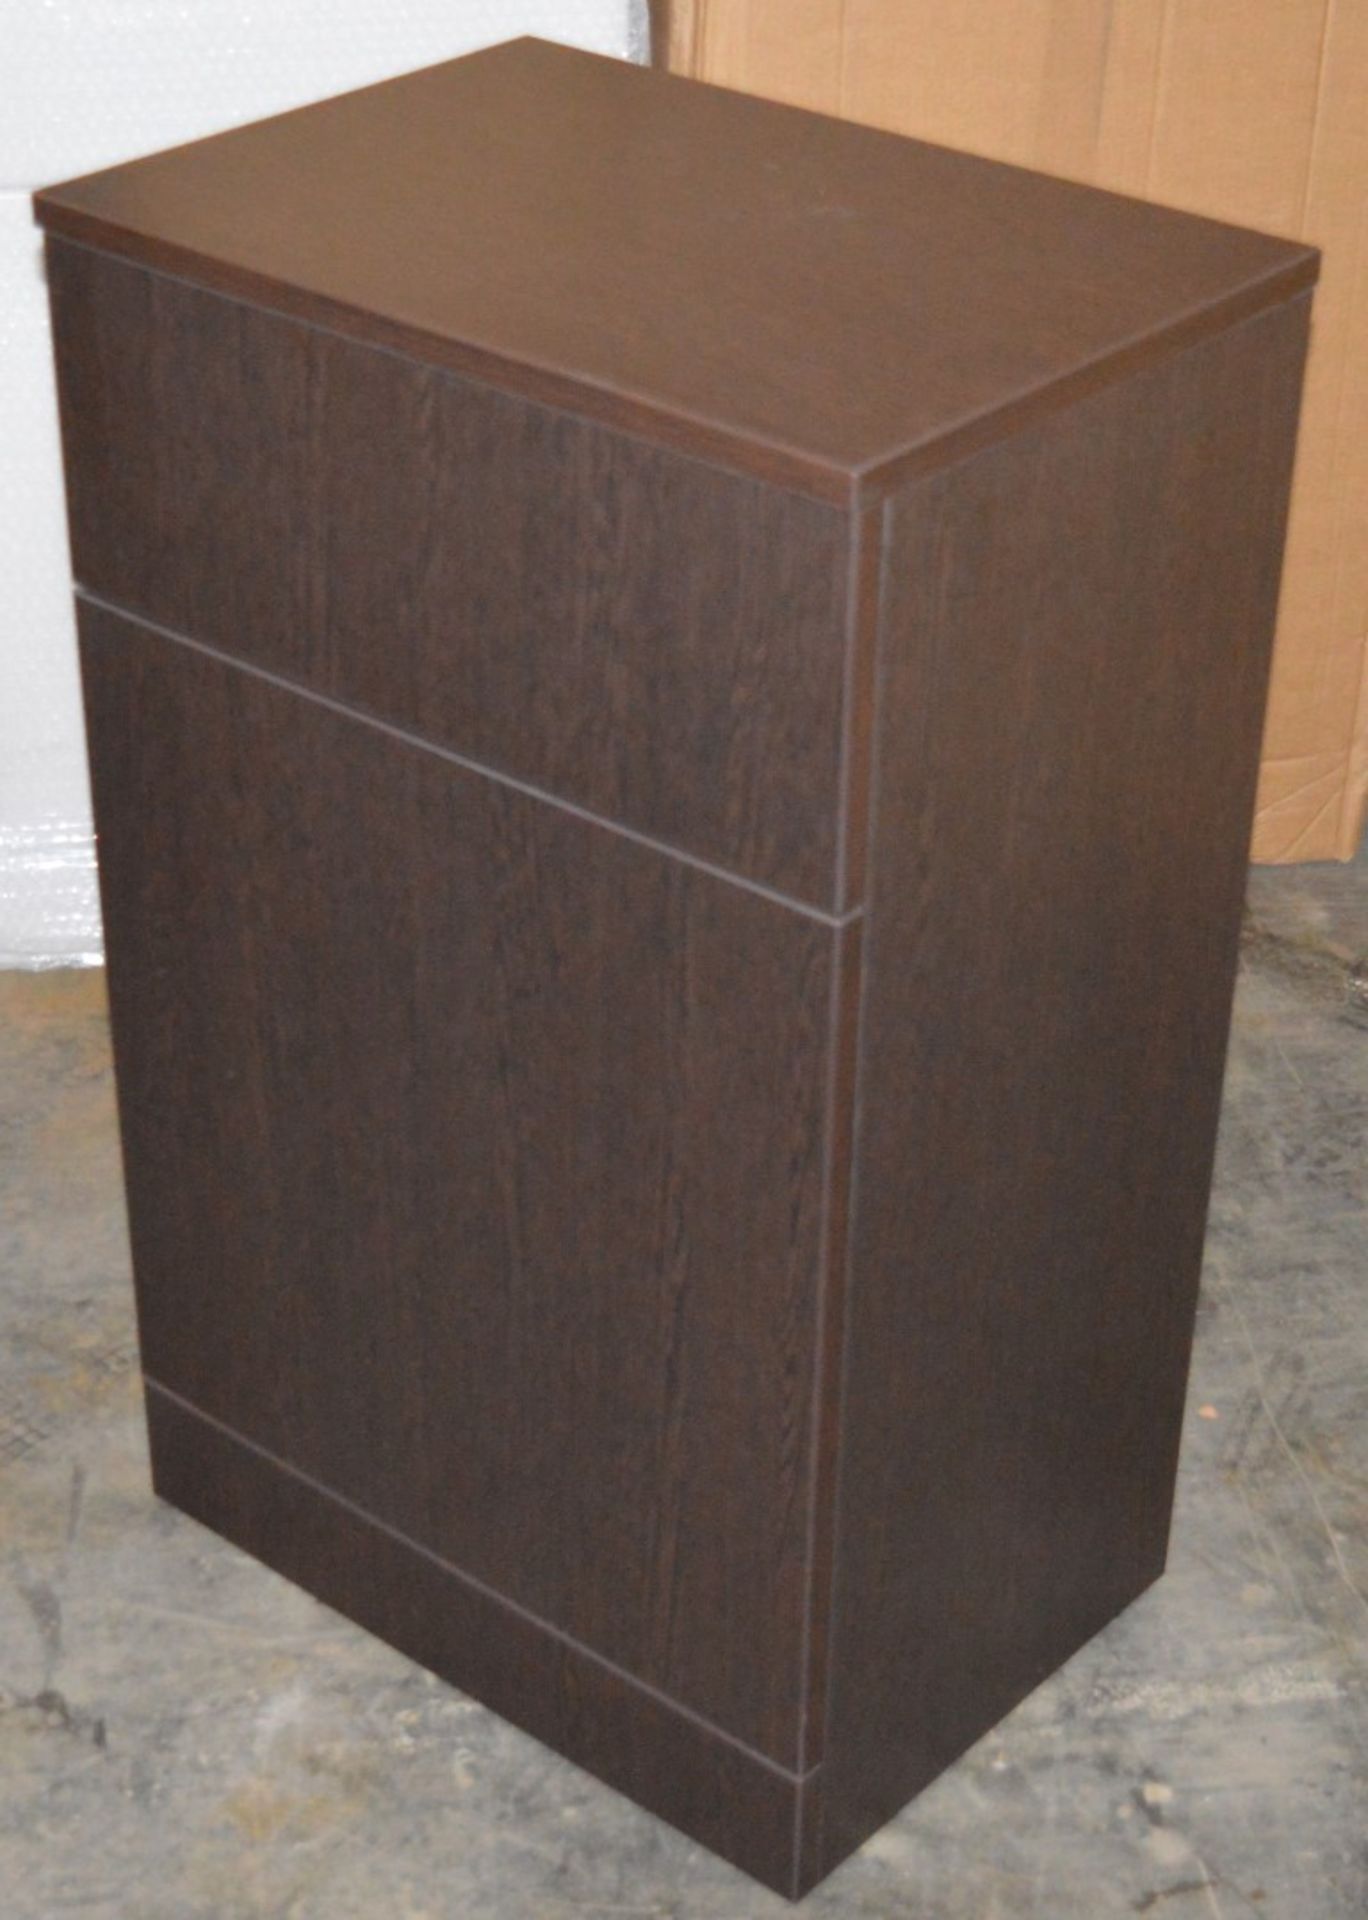 1 x Venizia BTW Toilet Pan Unit in Wenge With Concealed Cistern - 500mm Width - Includes Push Button - Image 3 of 4